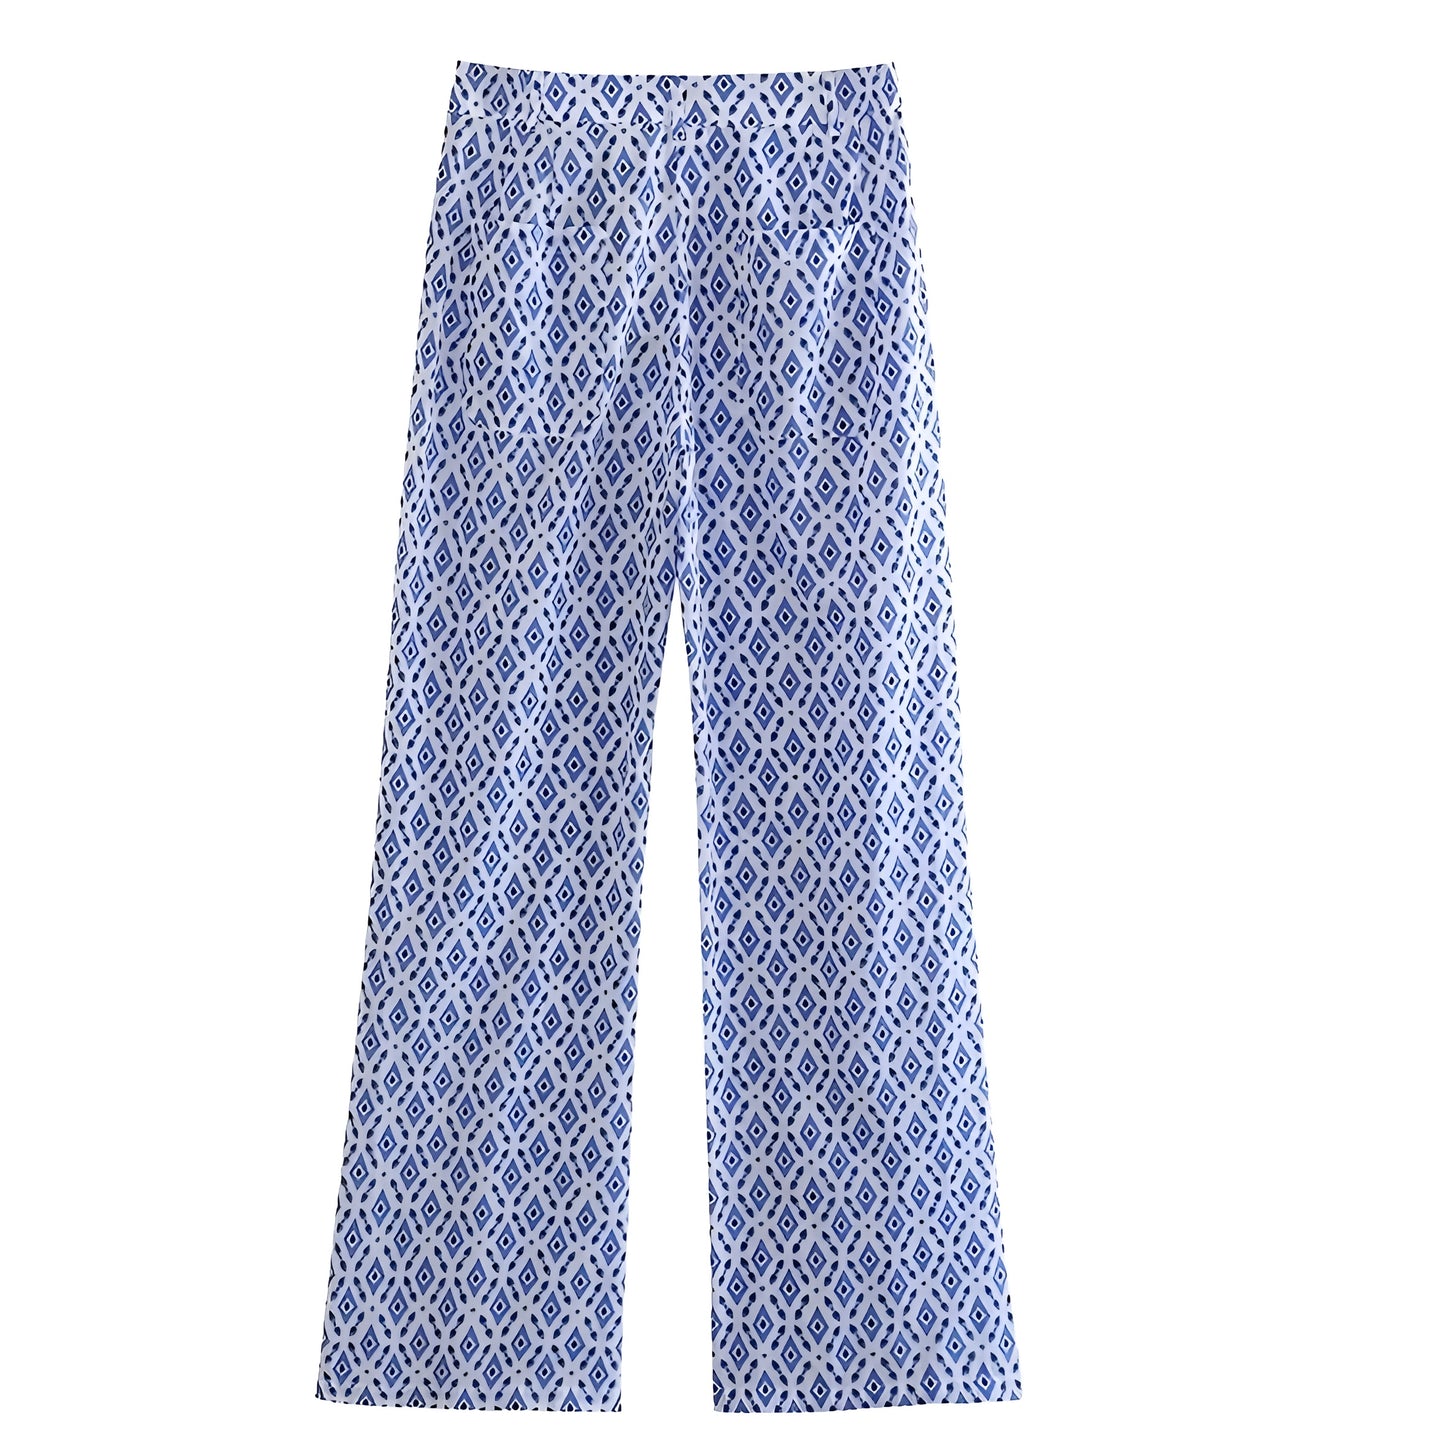 Asos Blue & White Patterned Mid-Rise Flare Pants